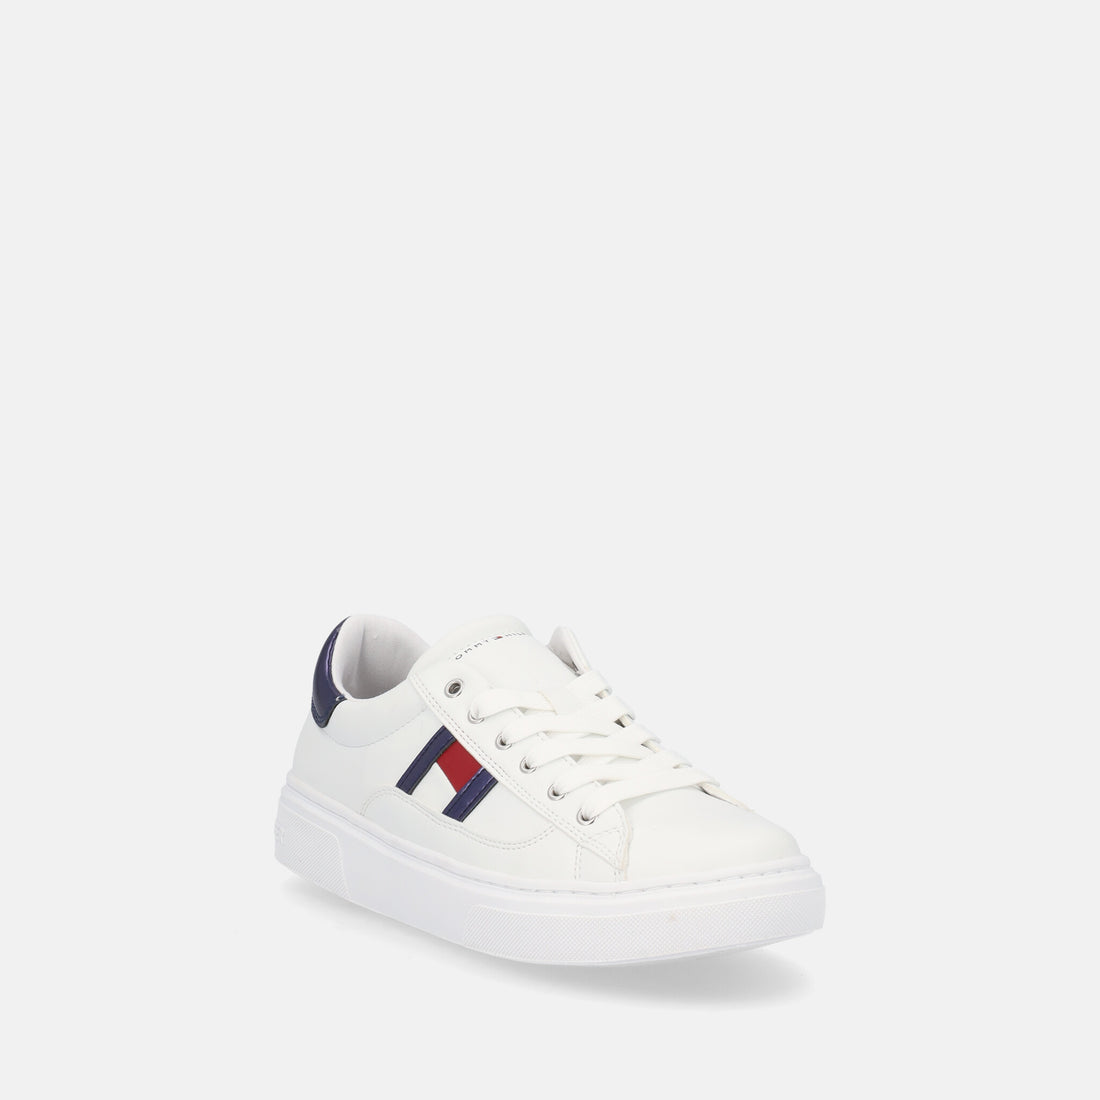 TOMMY HILFIGER SNEAKERS